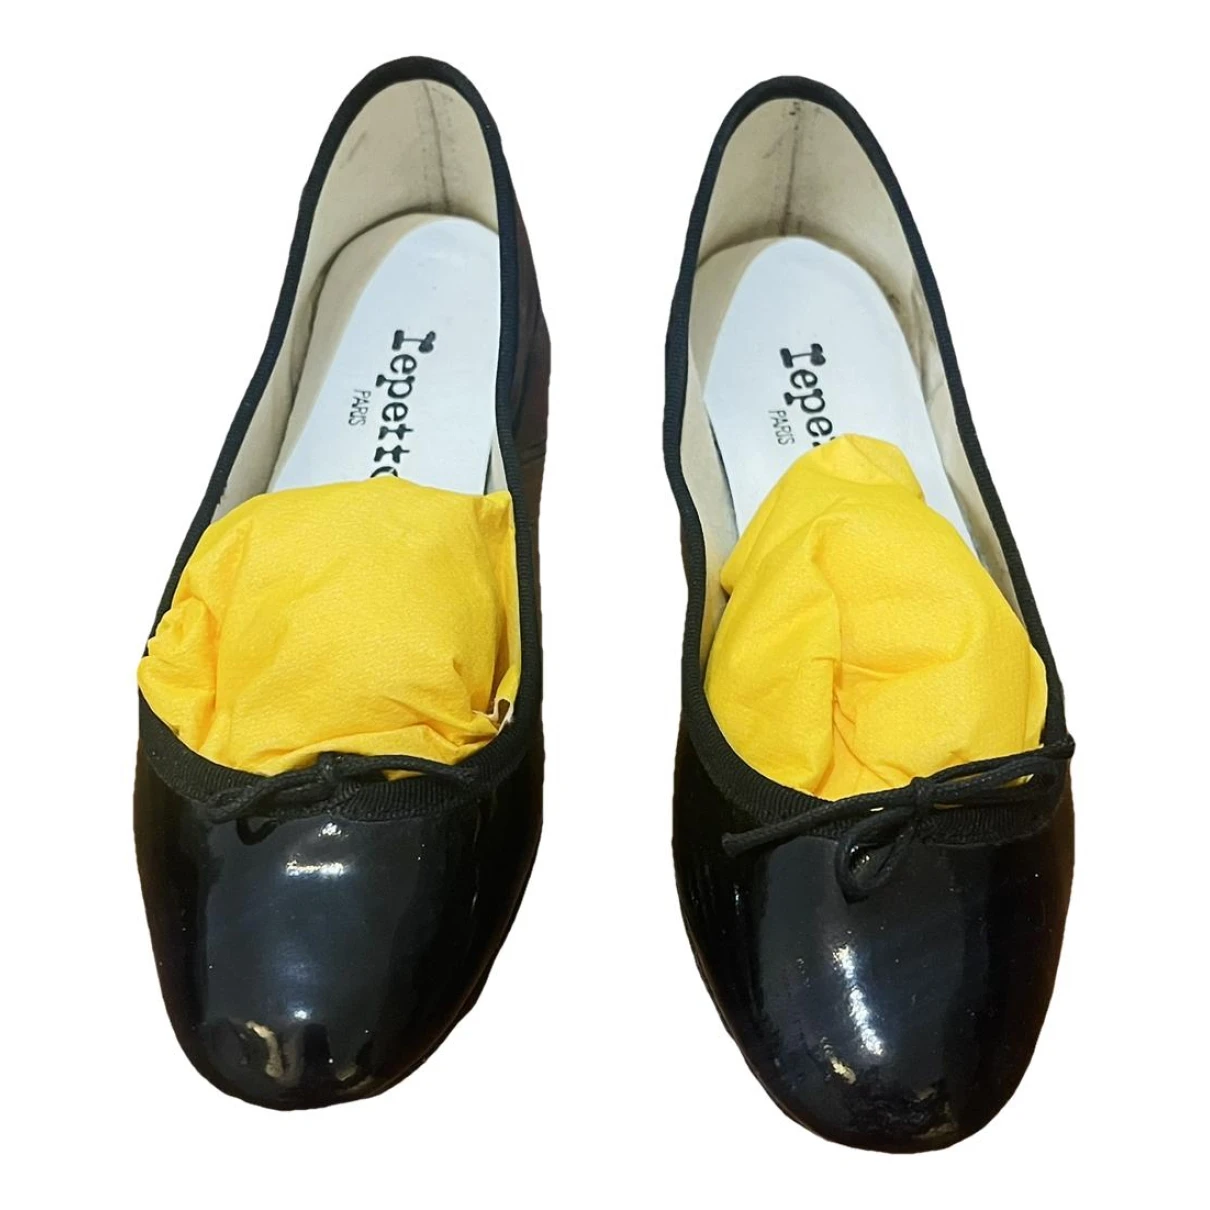 Pre-owned Repetto Patent Leather Ballet Flats In Black